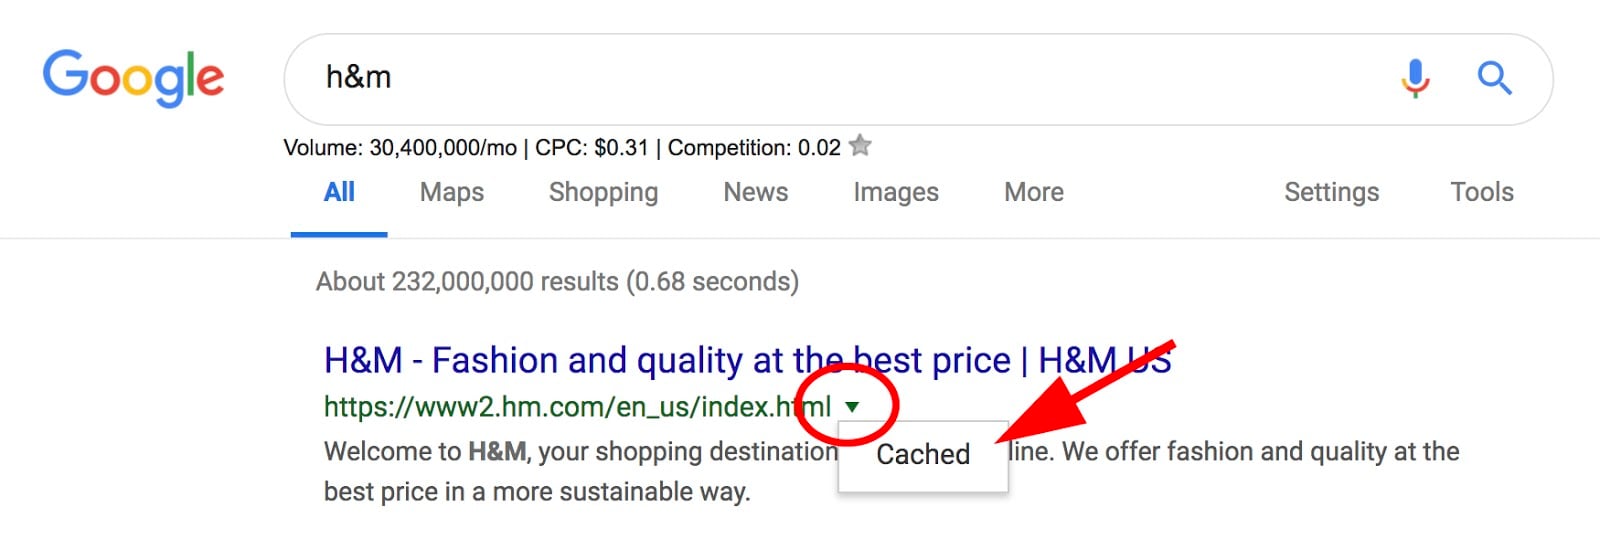 Google Cache: How to View Cached Pages